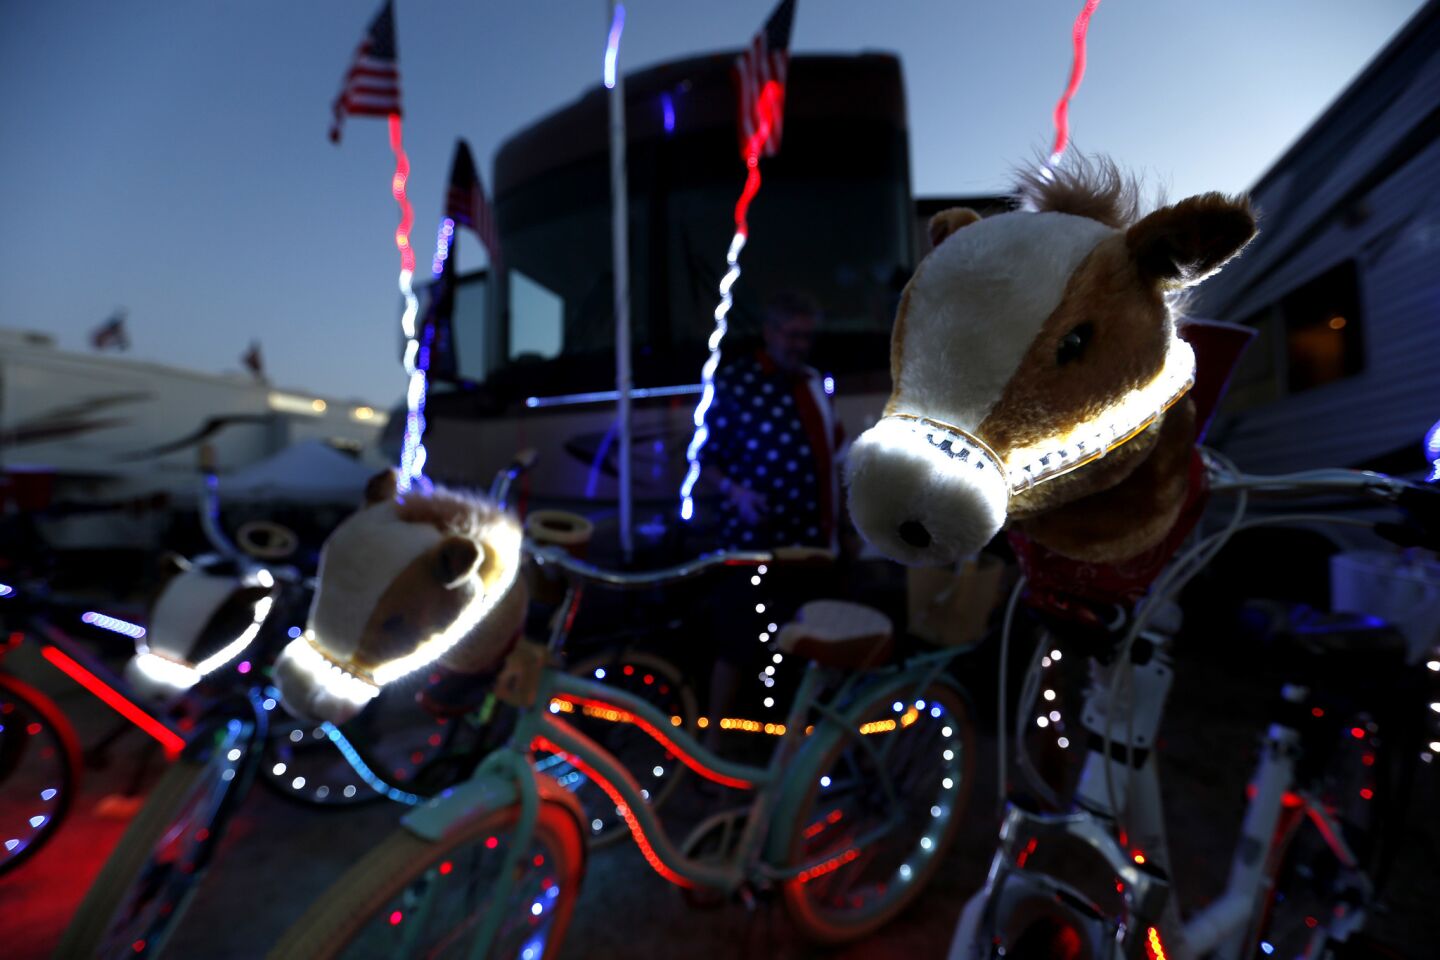 Horse heads and bicycles are illuminated with LED lights, put on by Vito Pace, of Calabasas, at dusk in the RV Resort at Stagecoach Country Music Festival in Indio.